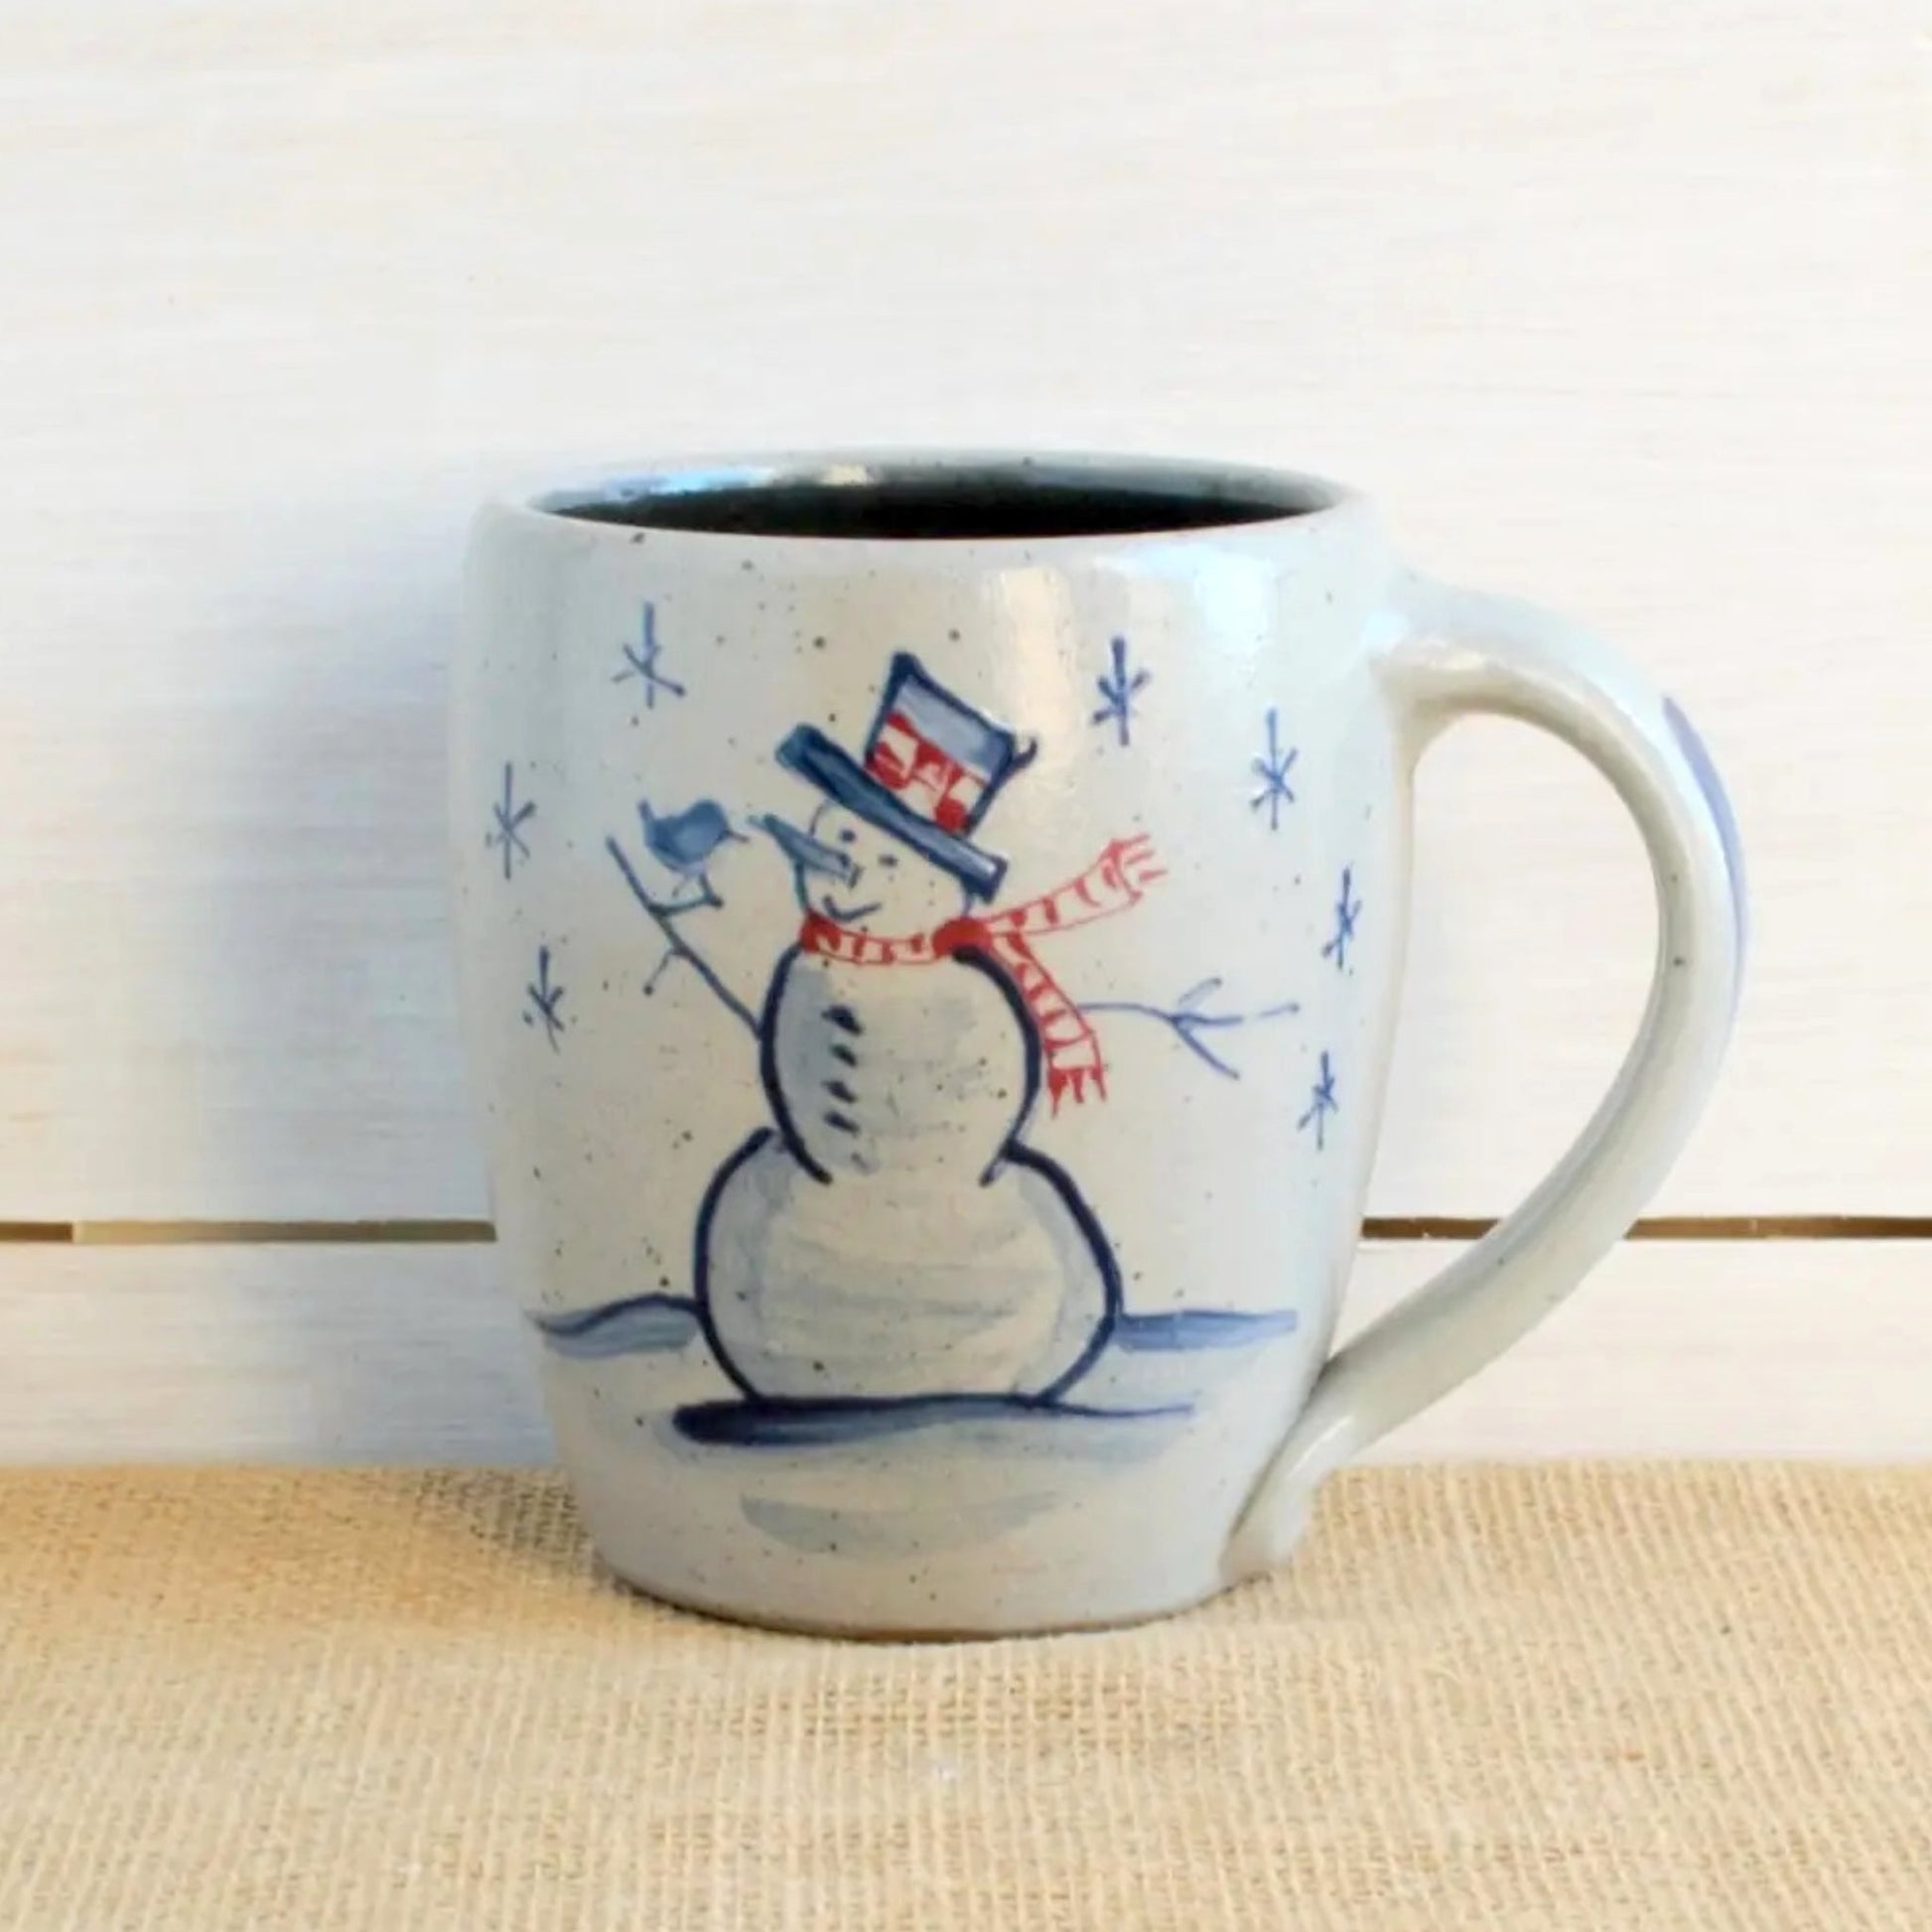 Snowman Pottery Mug - Made in the USA